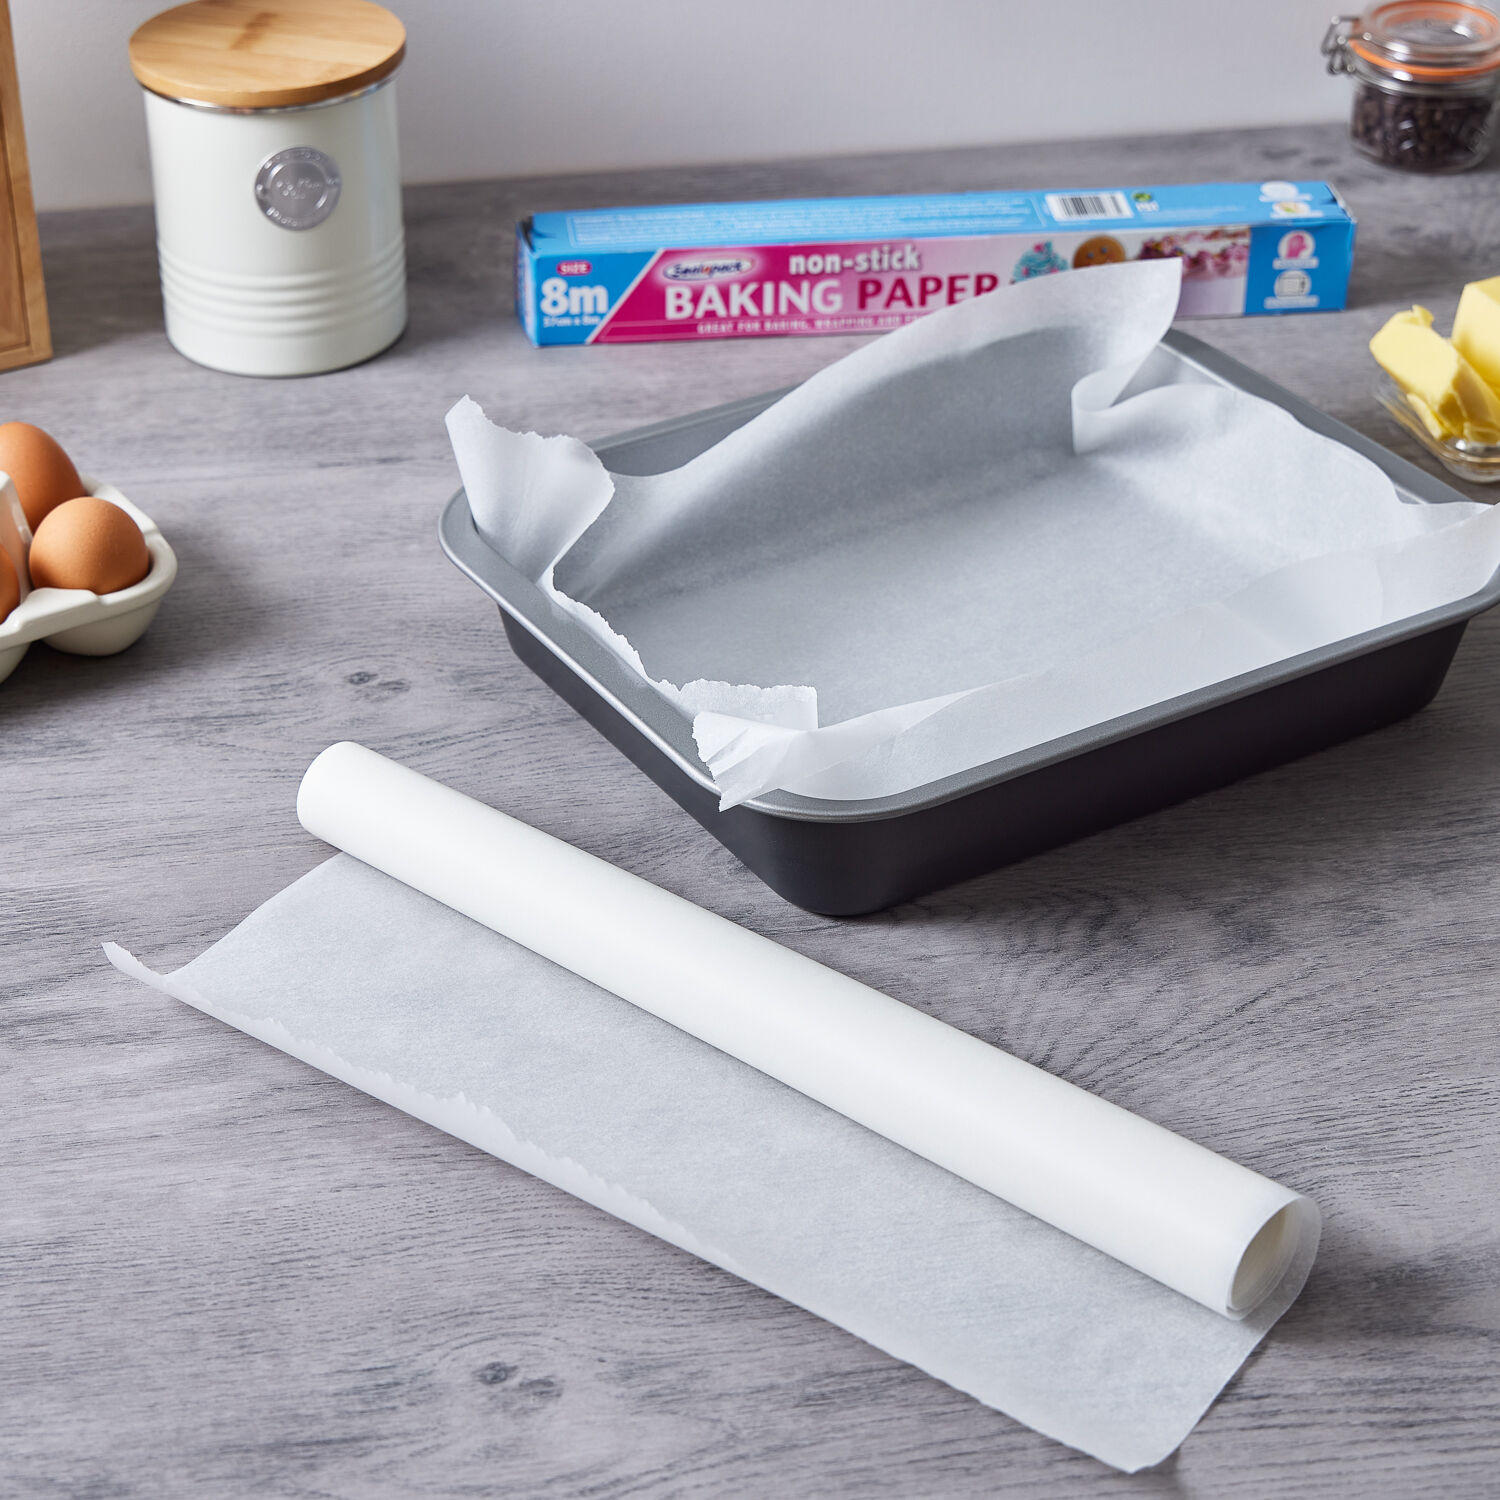 Sealapack Non-Stick Baking Paper 8m - Home Store + More